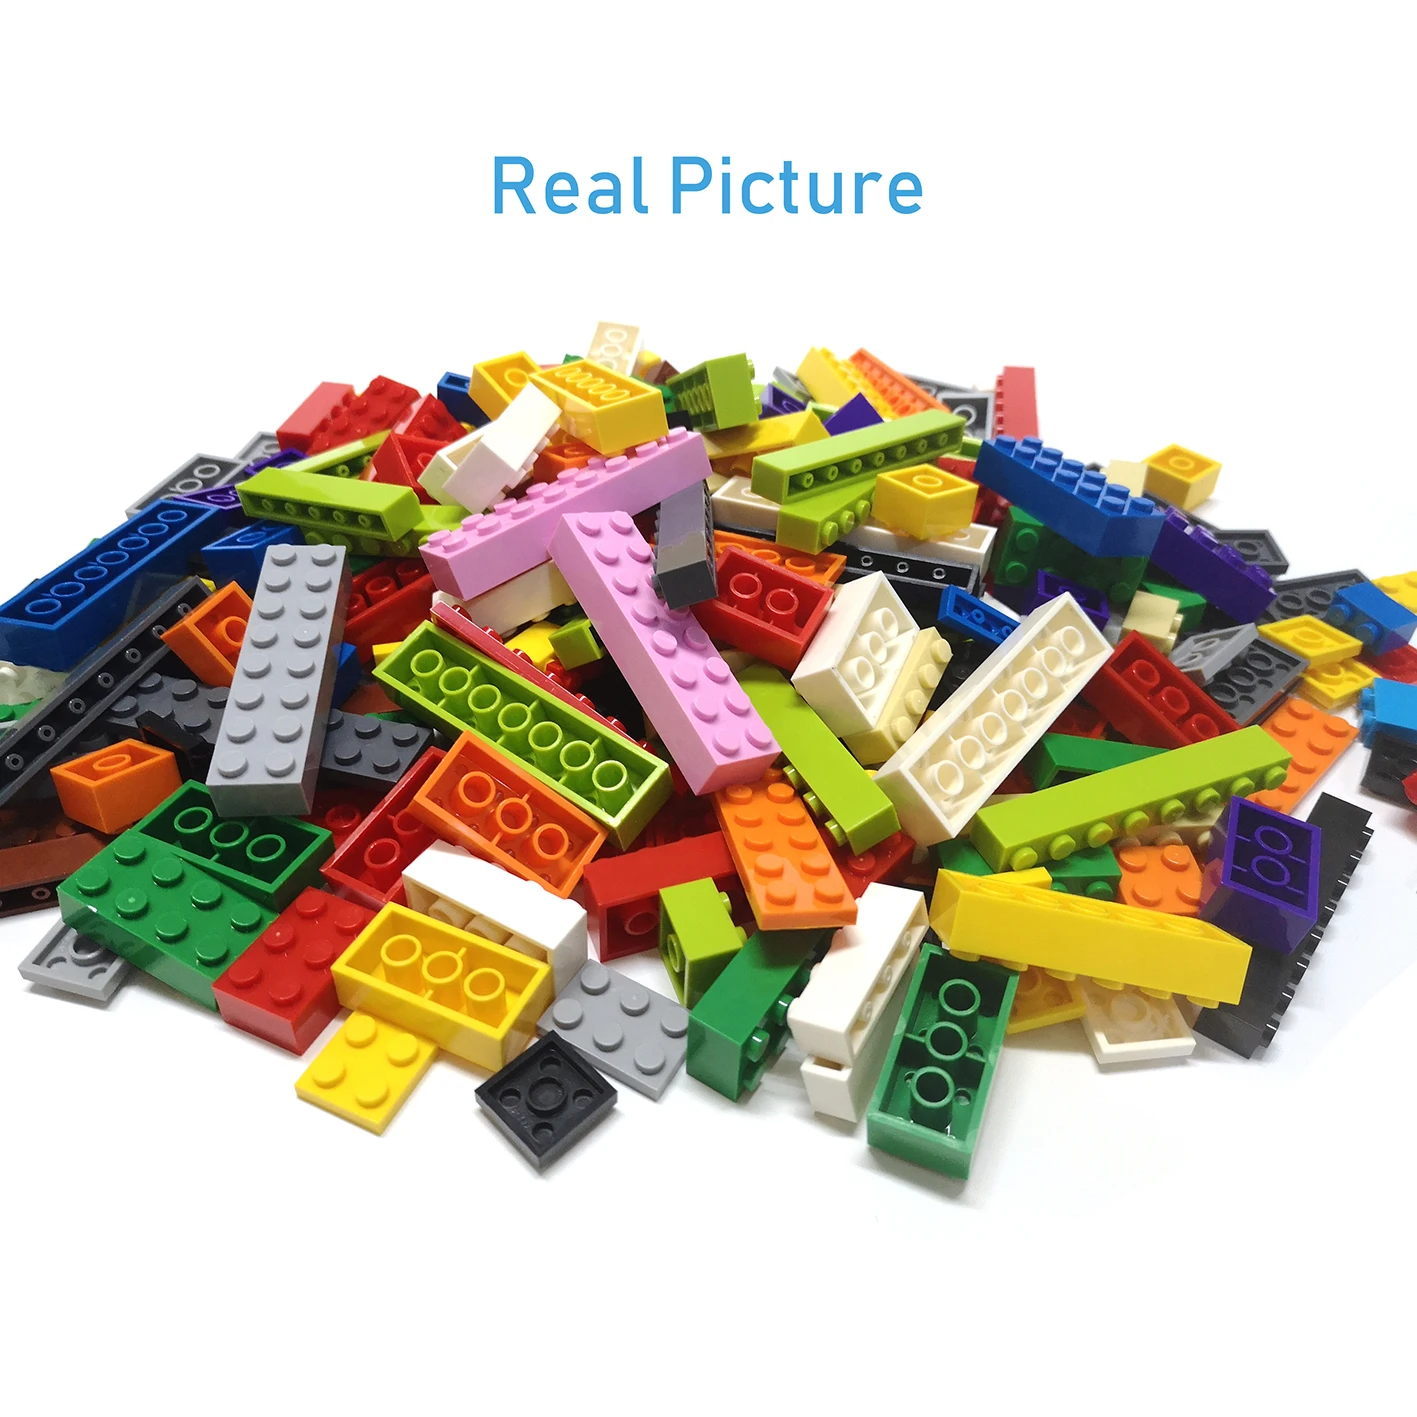 400pcs DIY Building Blocks Figure Bricks Smooth 1x1 24Color Educational Creative Toys for Children Size Compatible With 3070